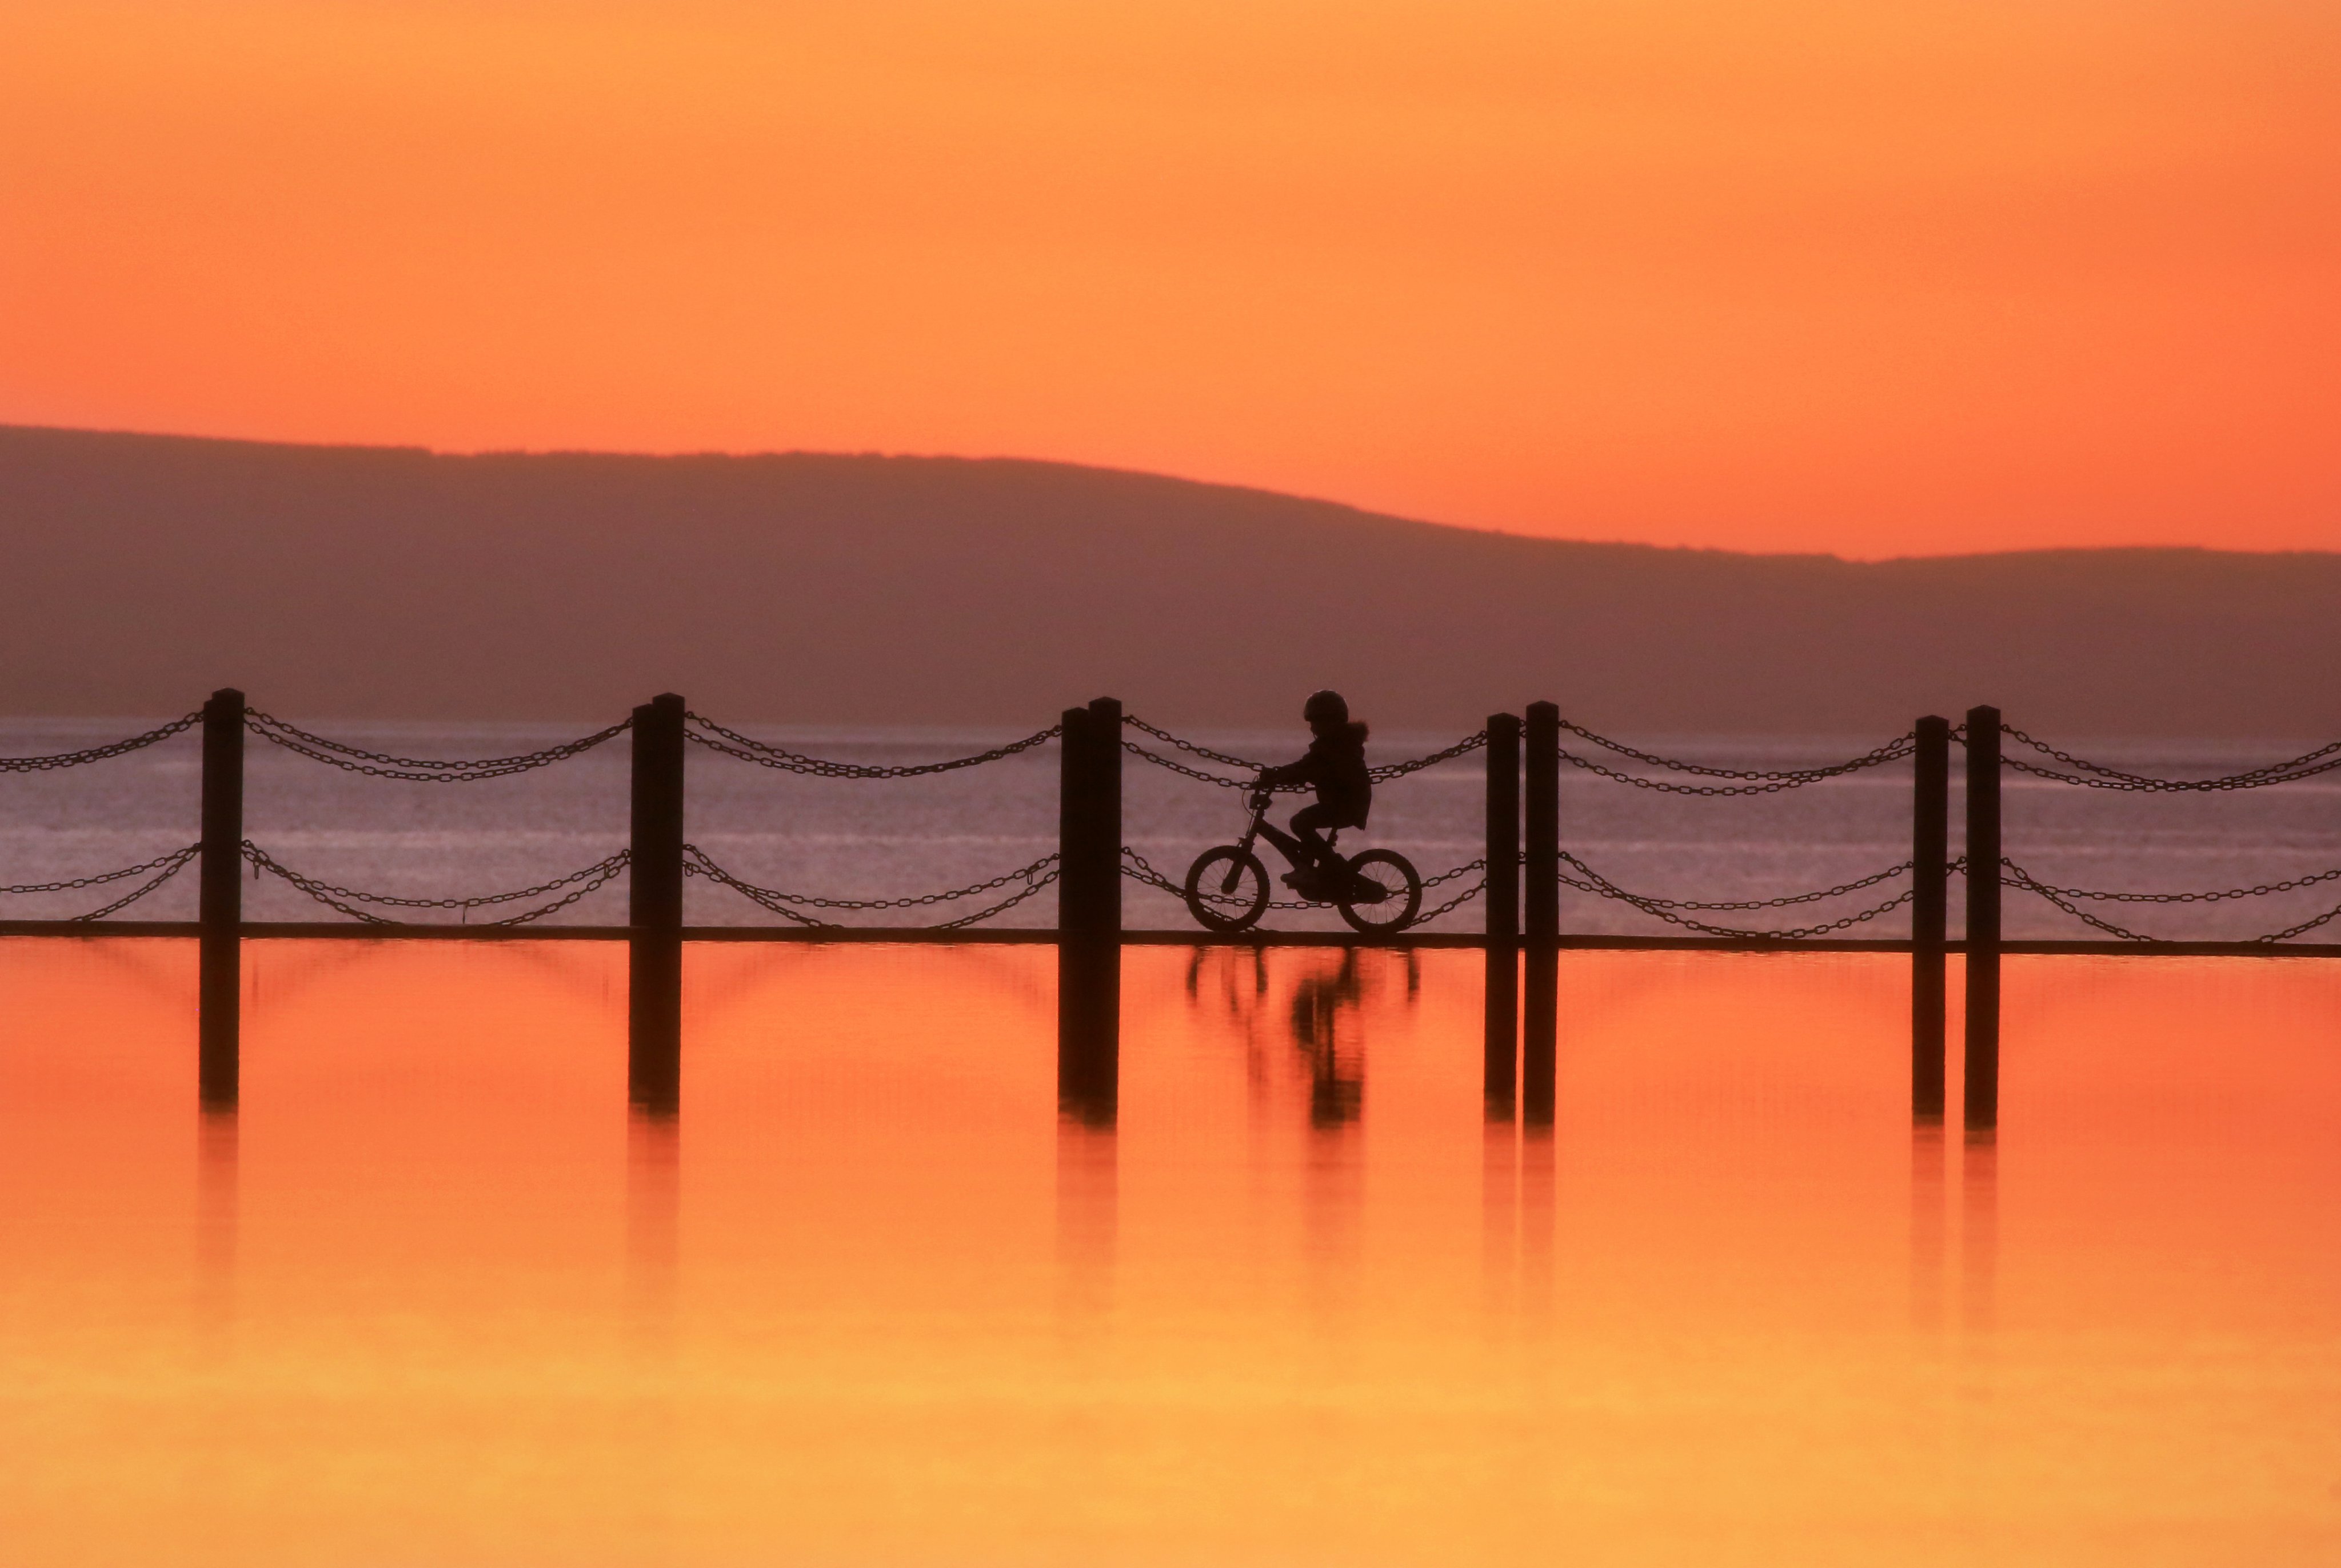 Tangerine Sunset. Cycling on the water Marine Causeway Weston-Super-Mare by Paul Silvers @Cloud9weather1